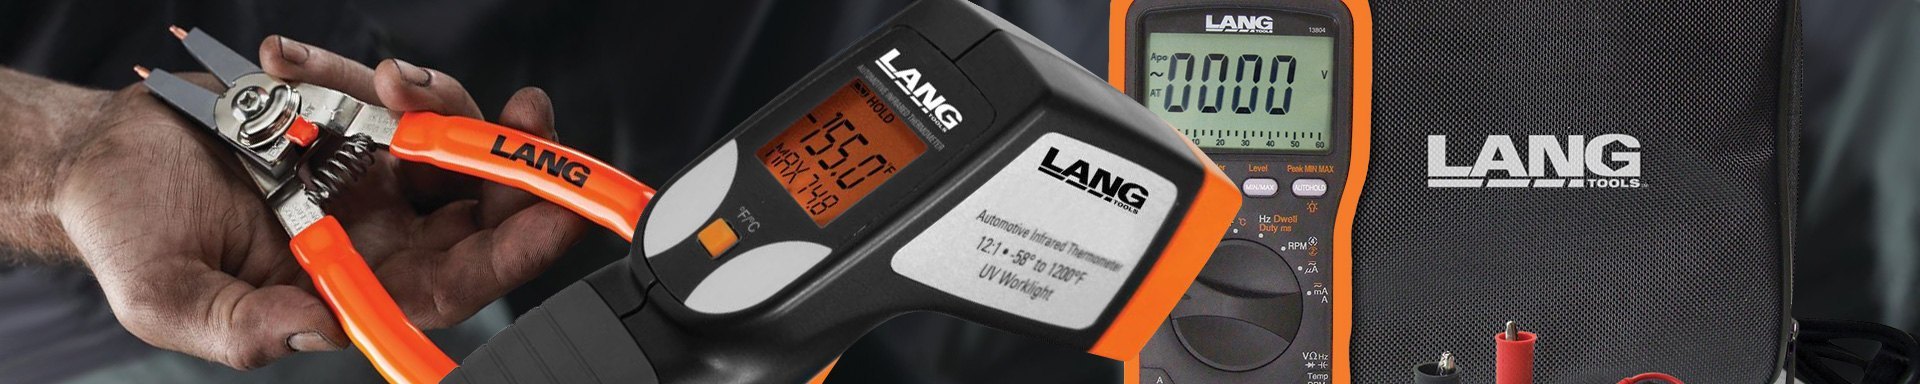 Lang Tools Battery Chargers & Jump Starters